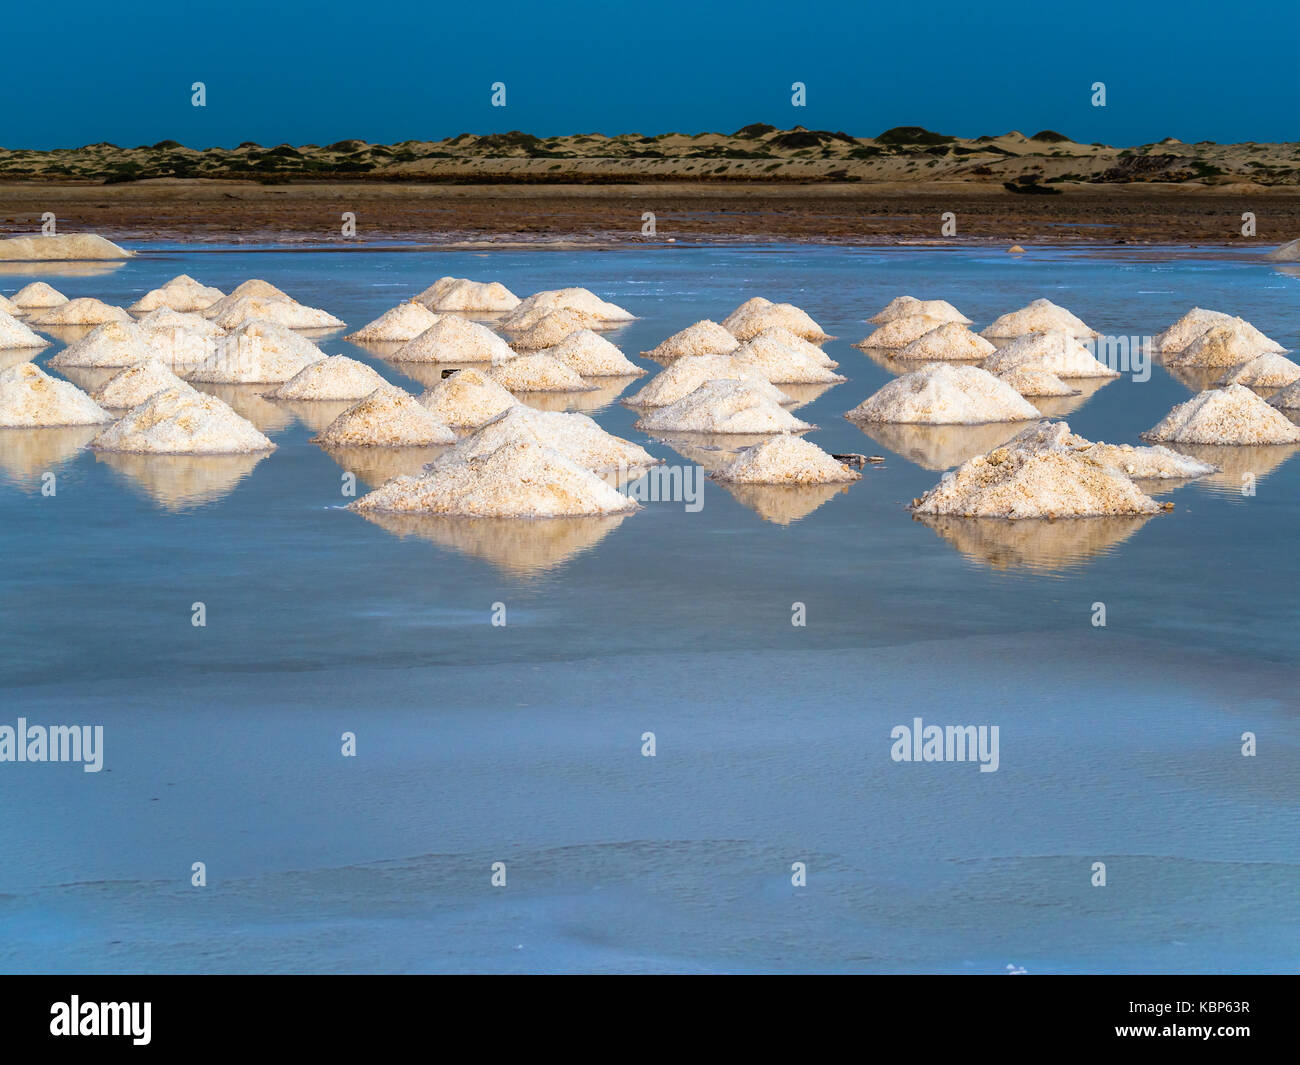 Evaporation pools with fresh salt crystals in Cape Verde, Sal Island Stock Photo